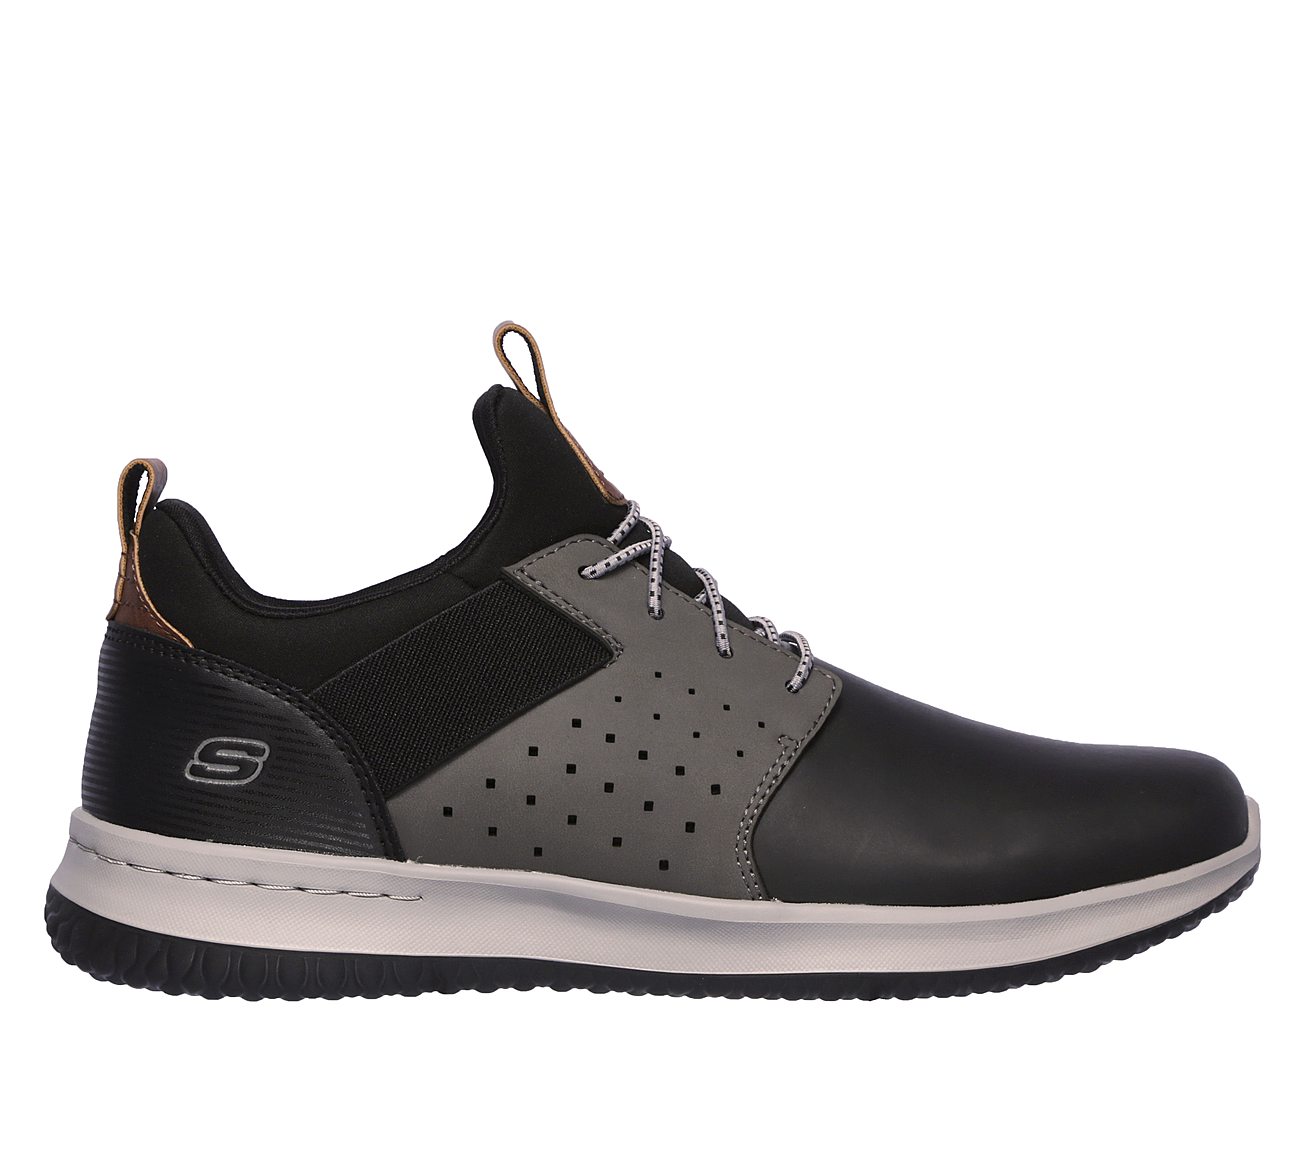 SKECHERS Delson - Axton SKECHERS USA Shoes